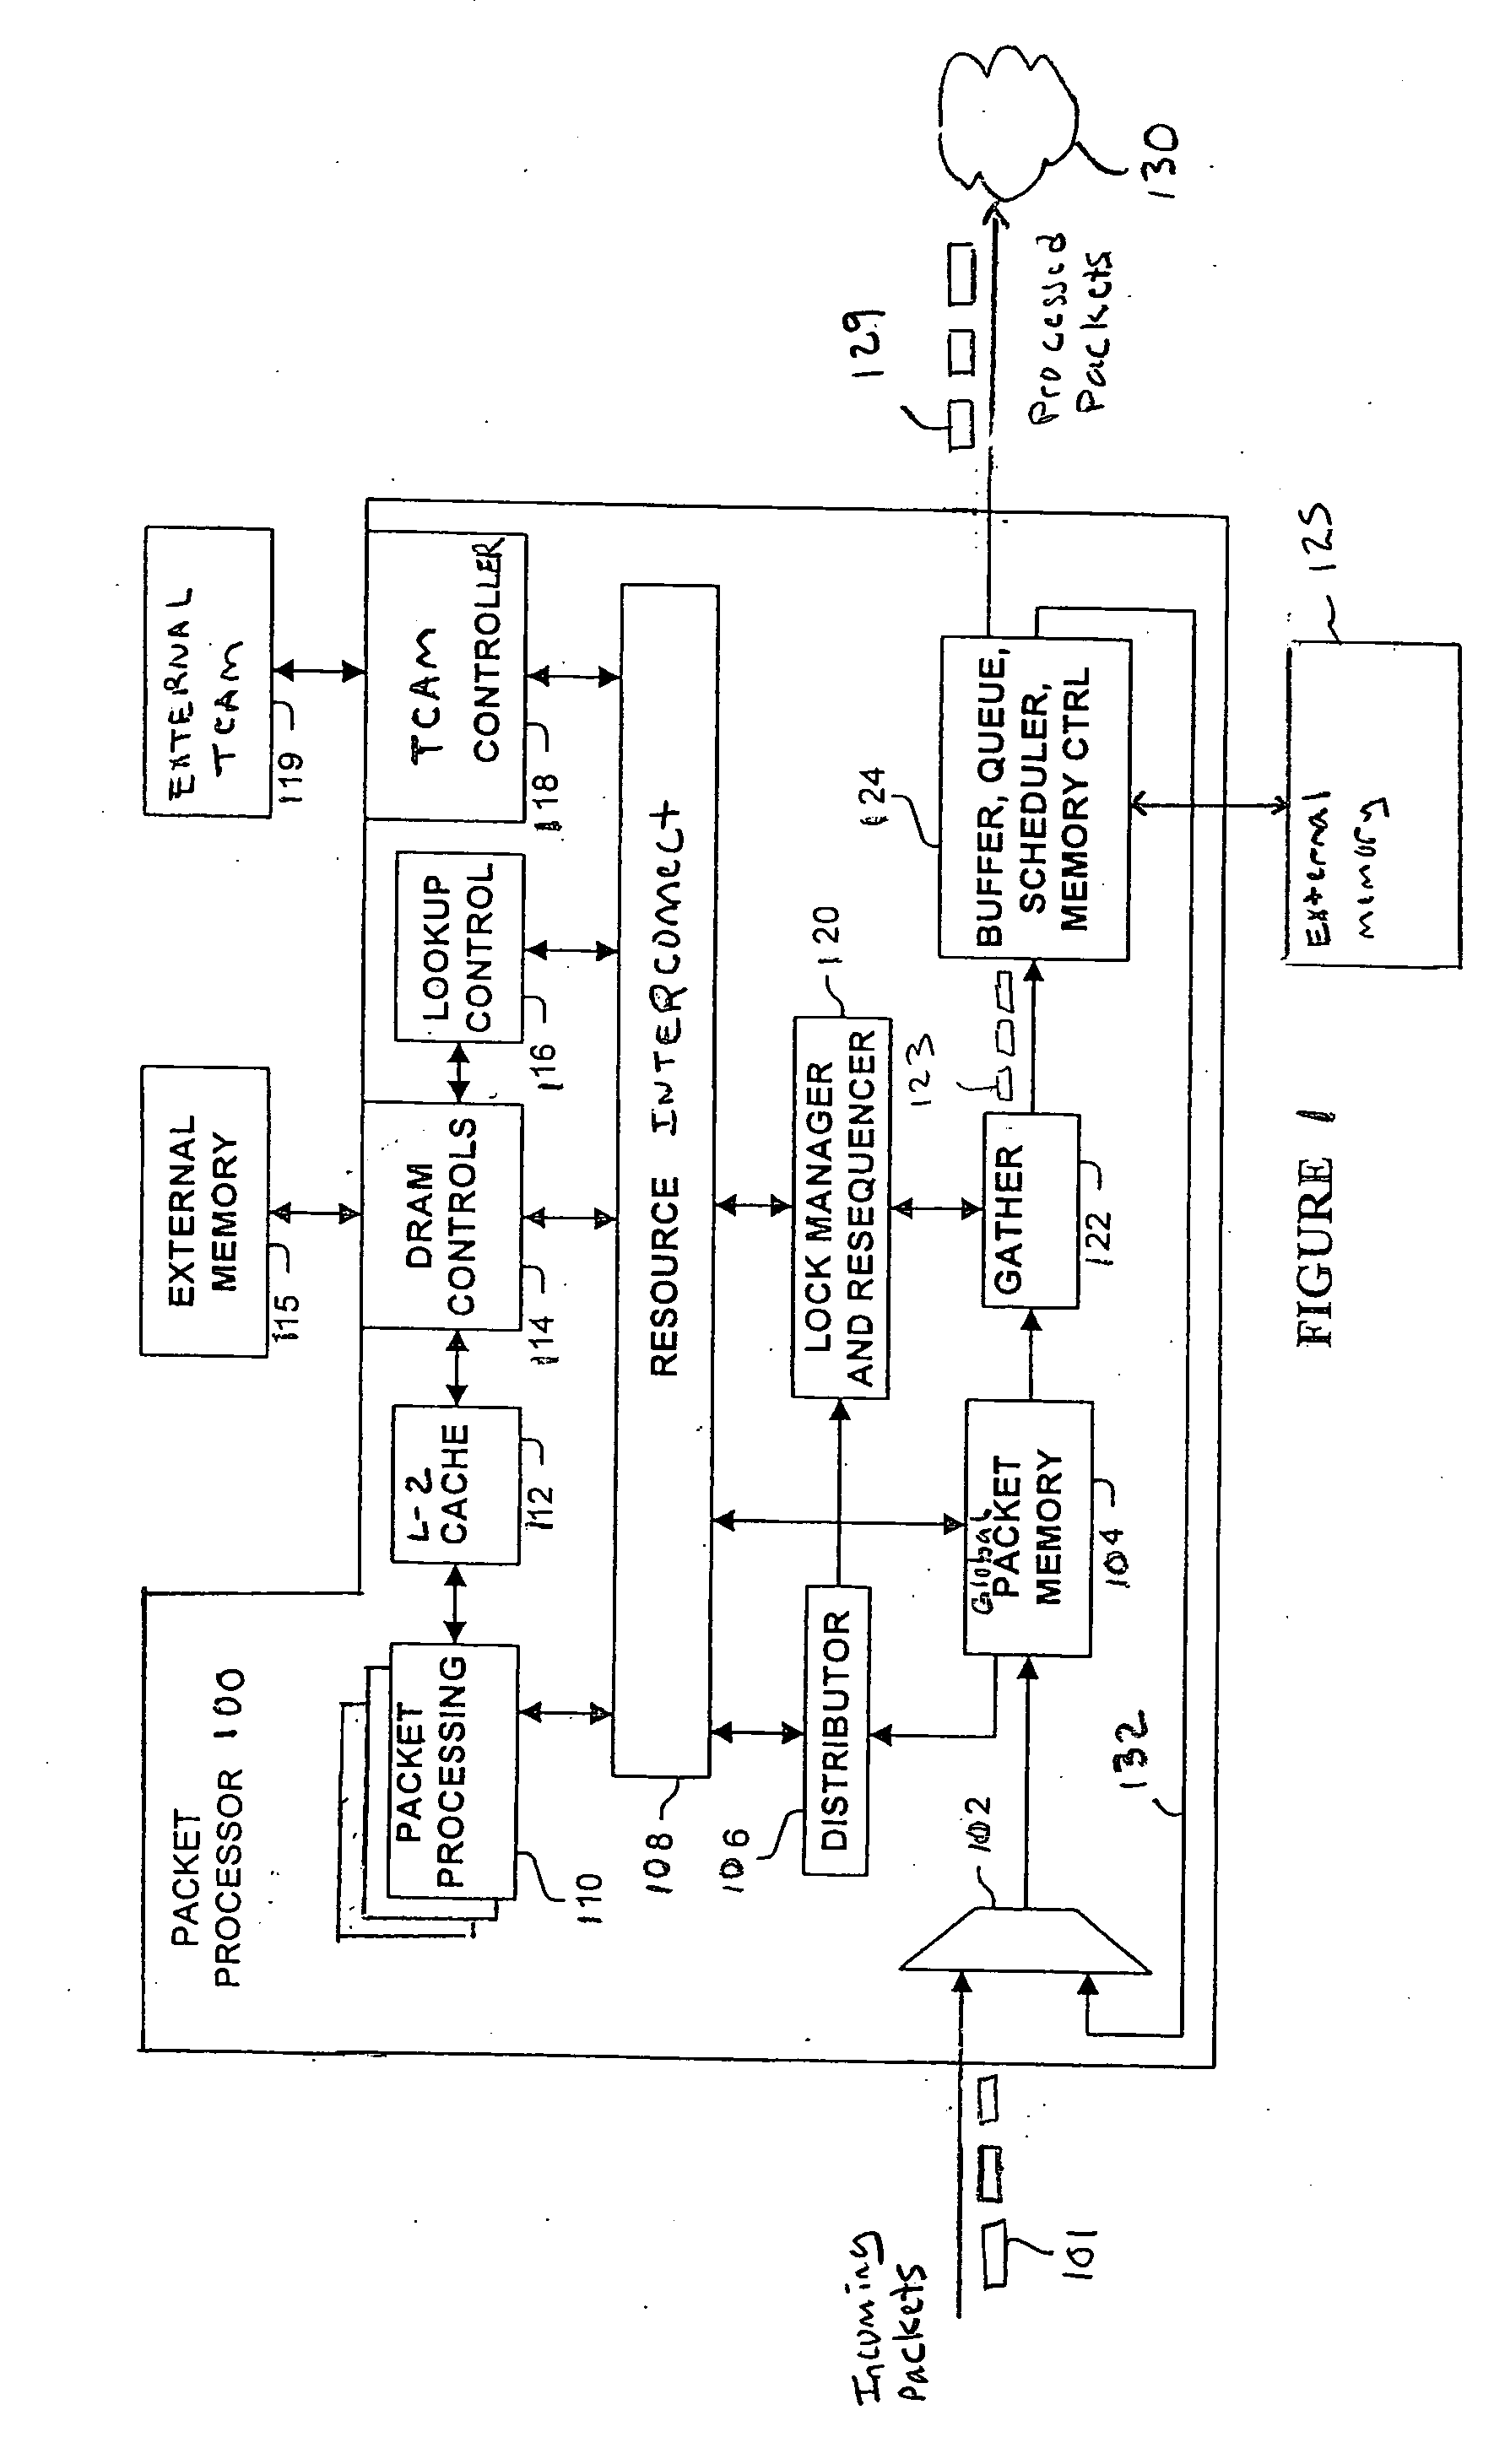 Multi-threaded packeting processing architecture